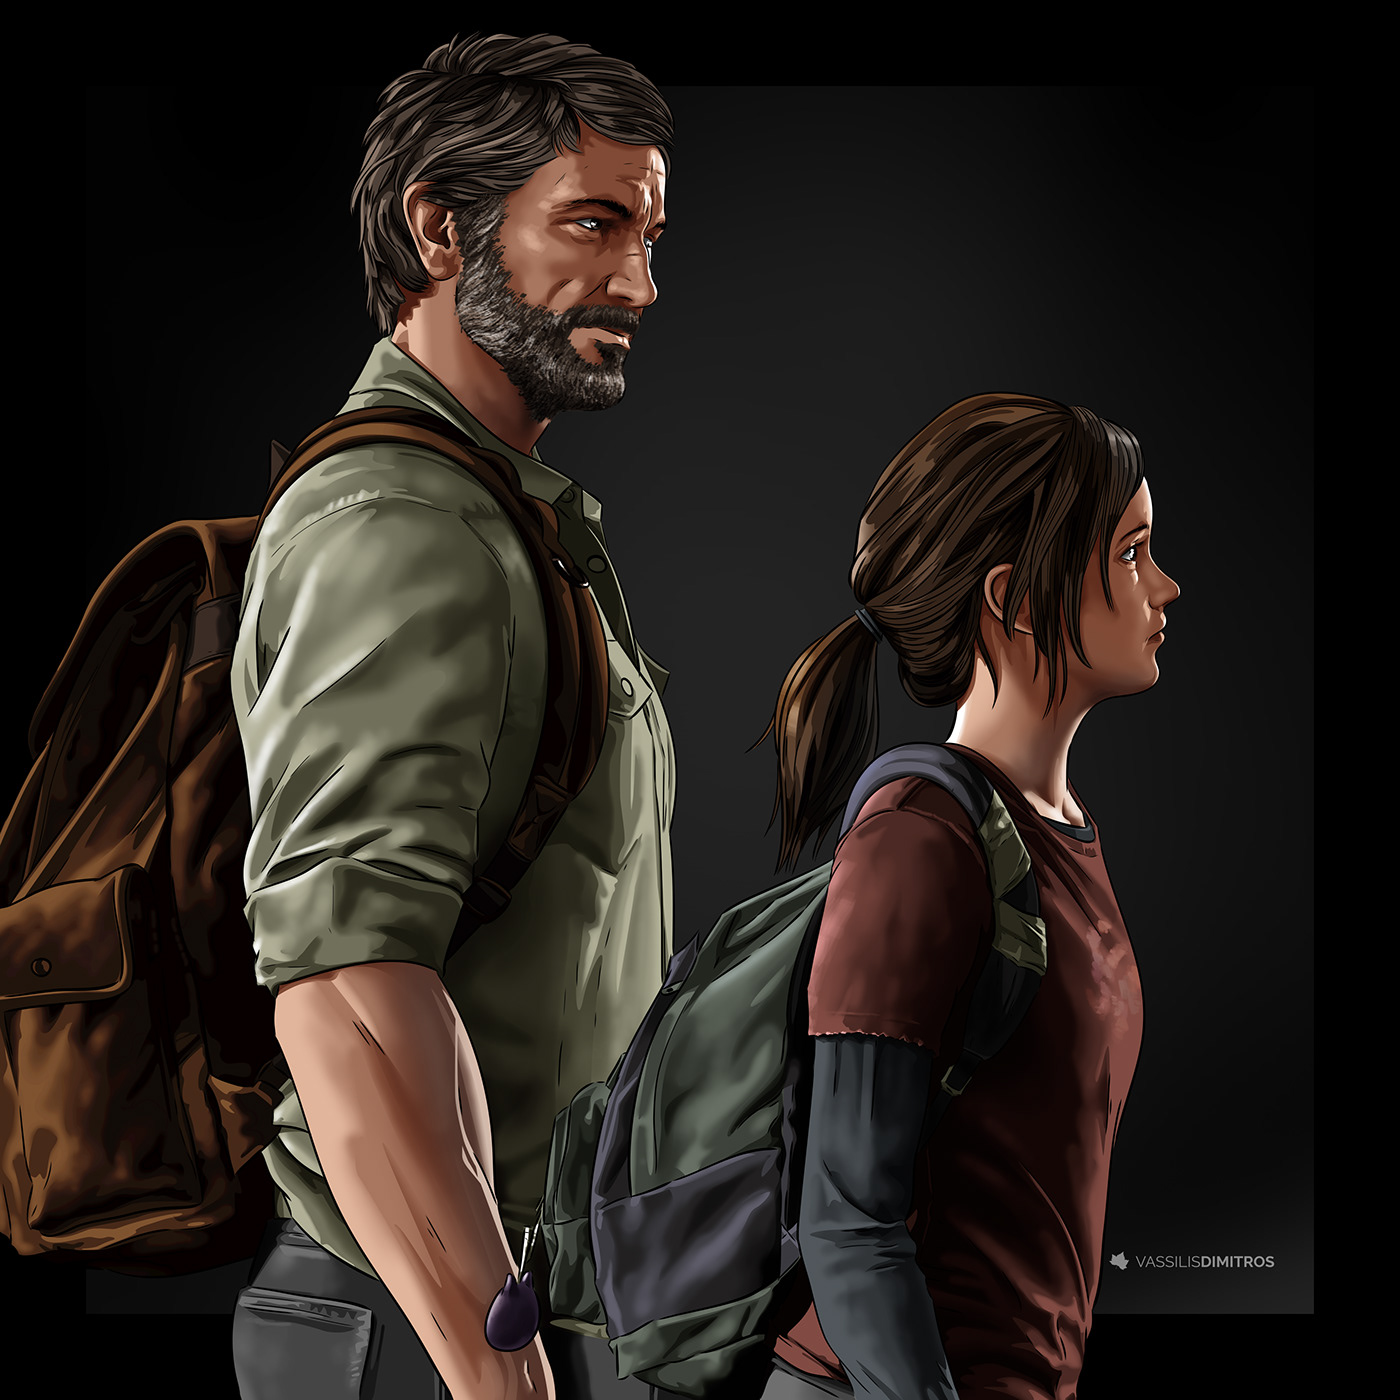 The Last of Us The Last Of Us Part II a design awards